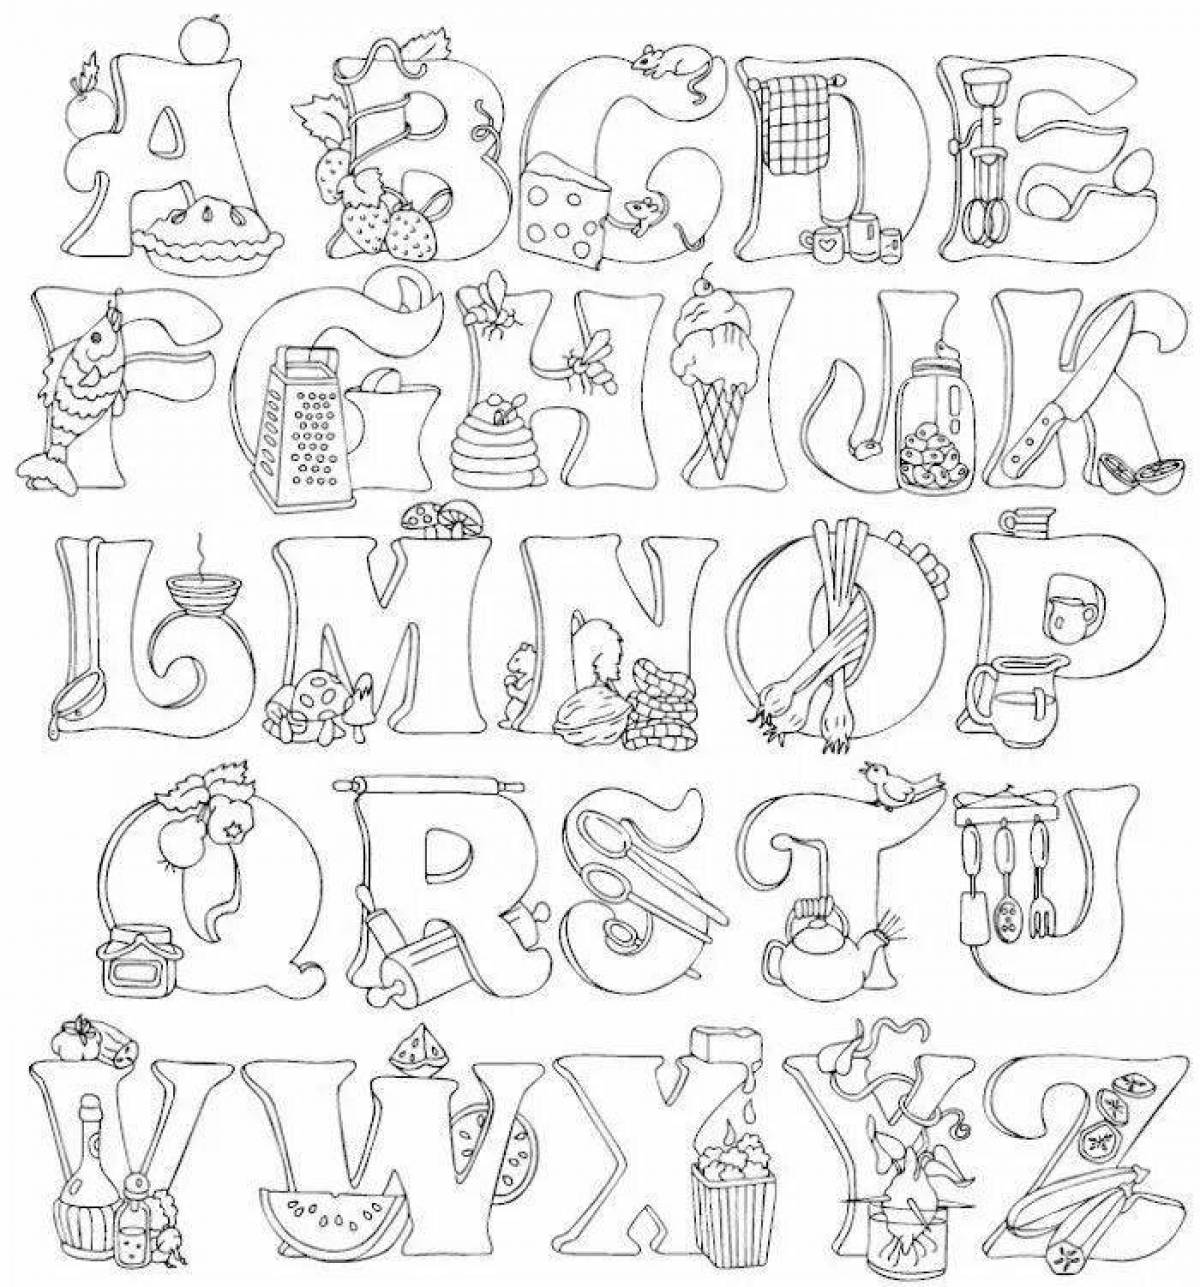 A fun coloring book with alphabet letters